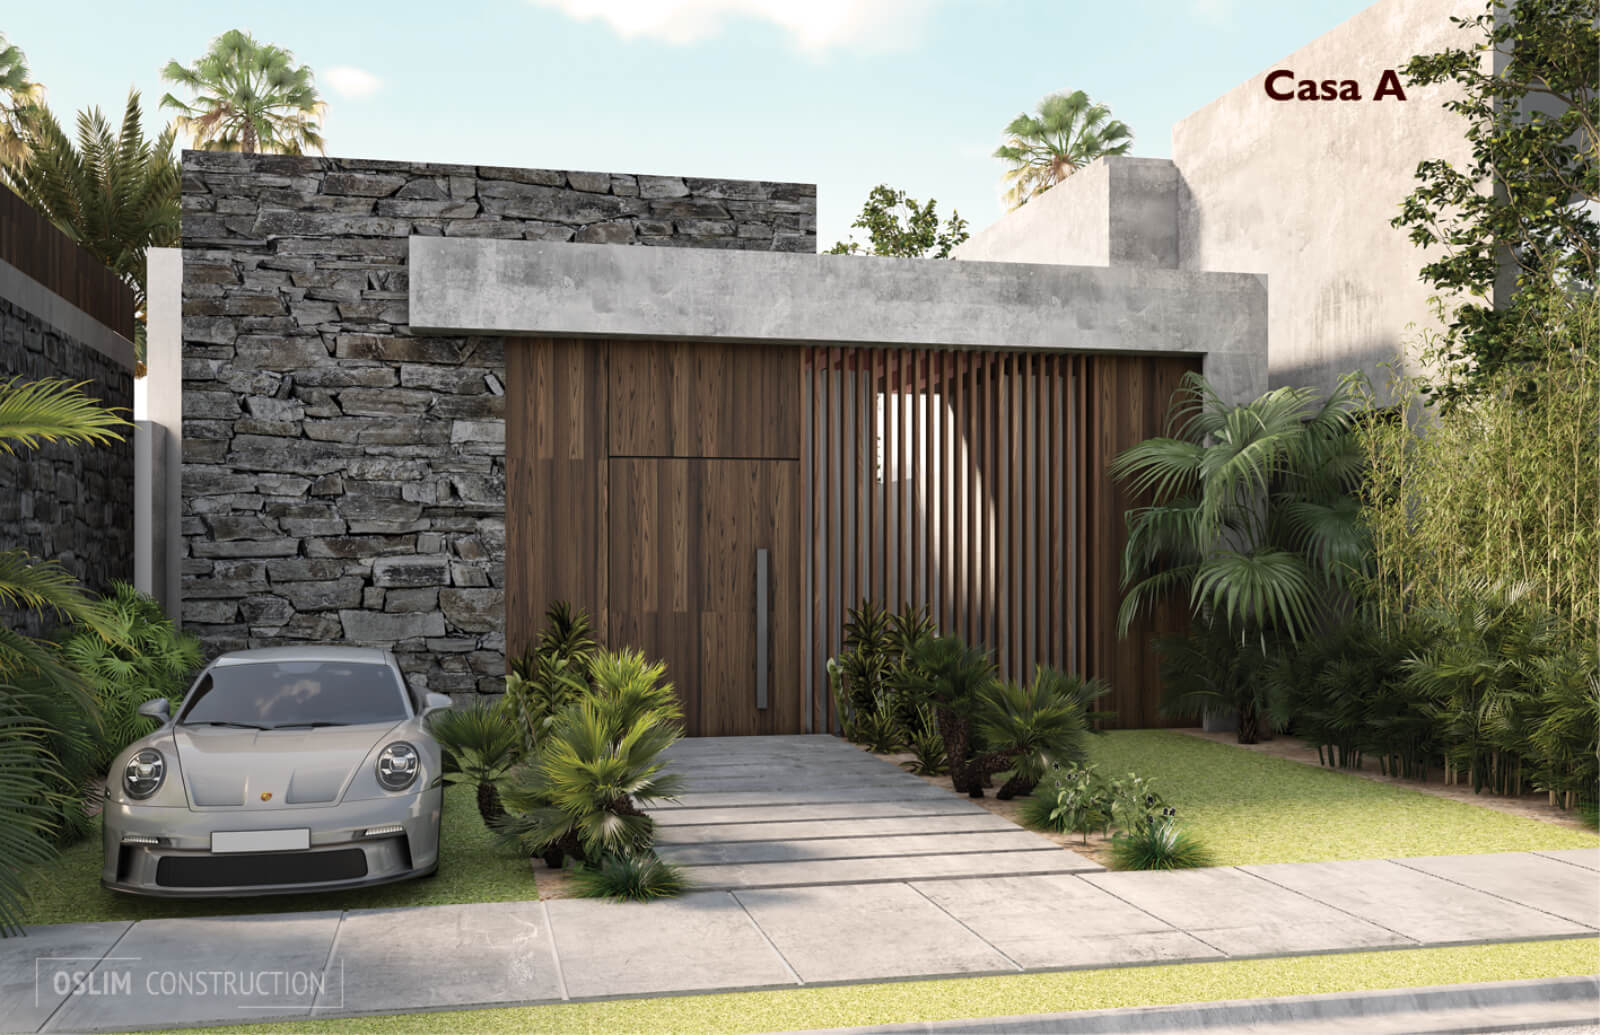 House with garden and private pool, beach club, clubhouse, sports courts, for sale Tulum.